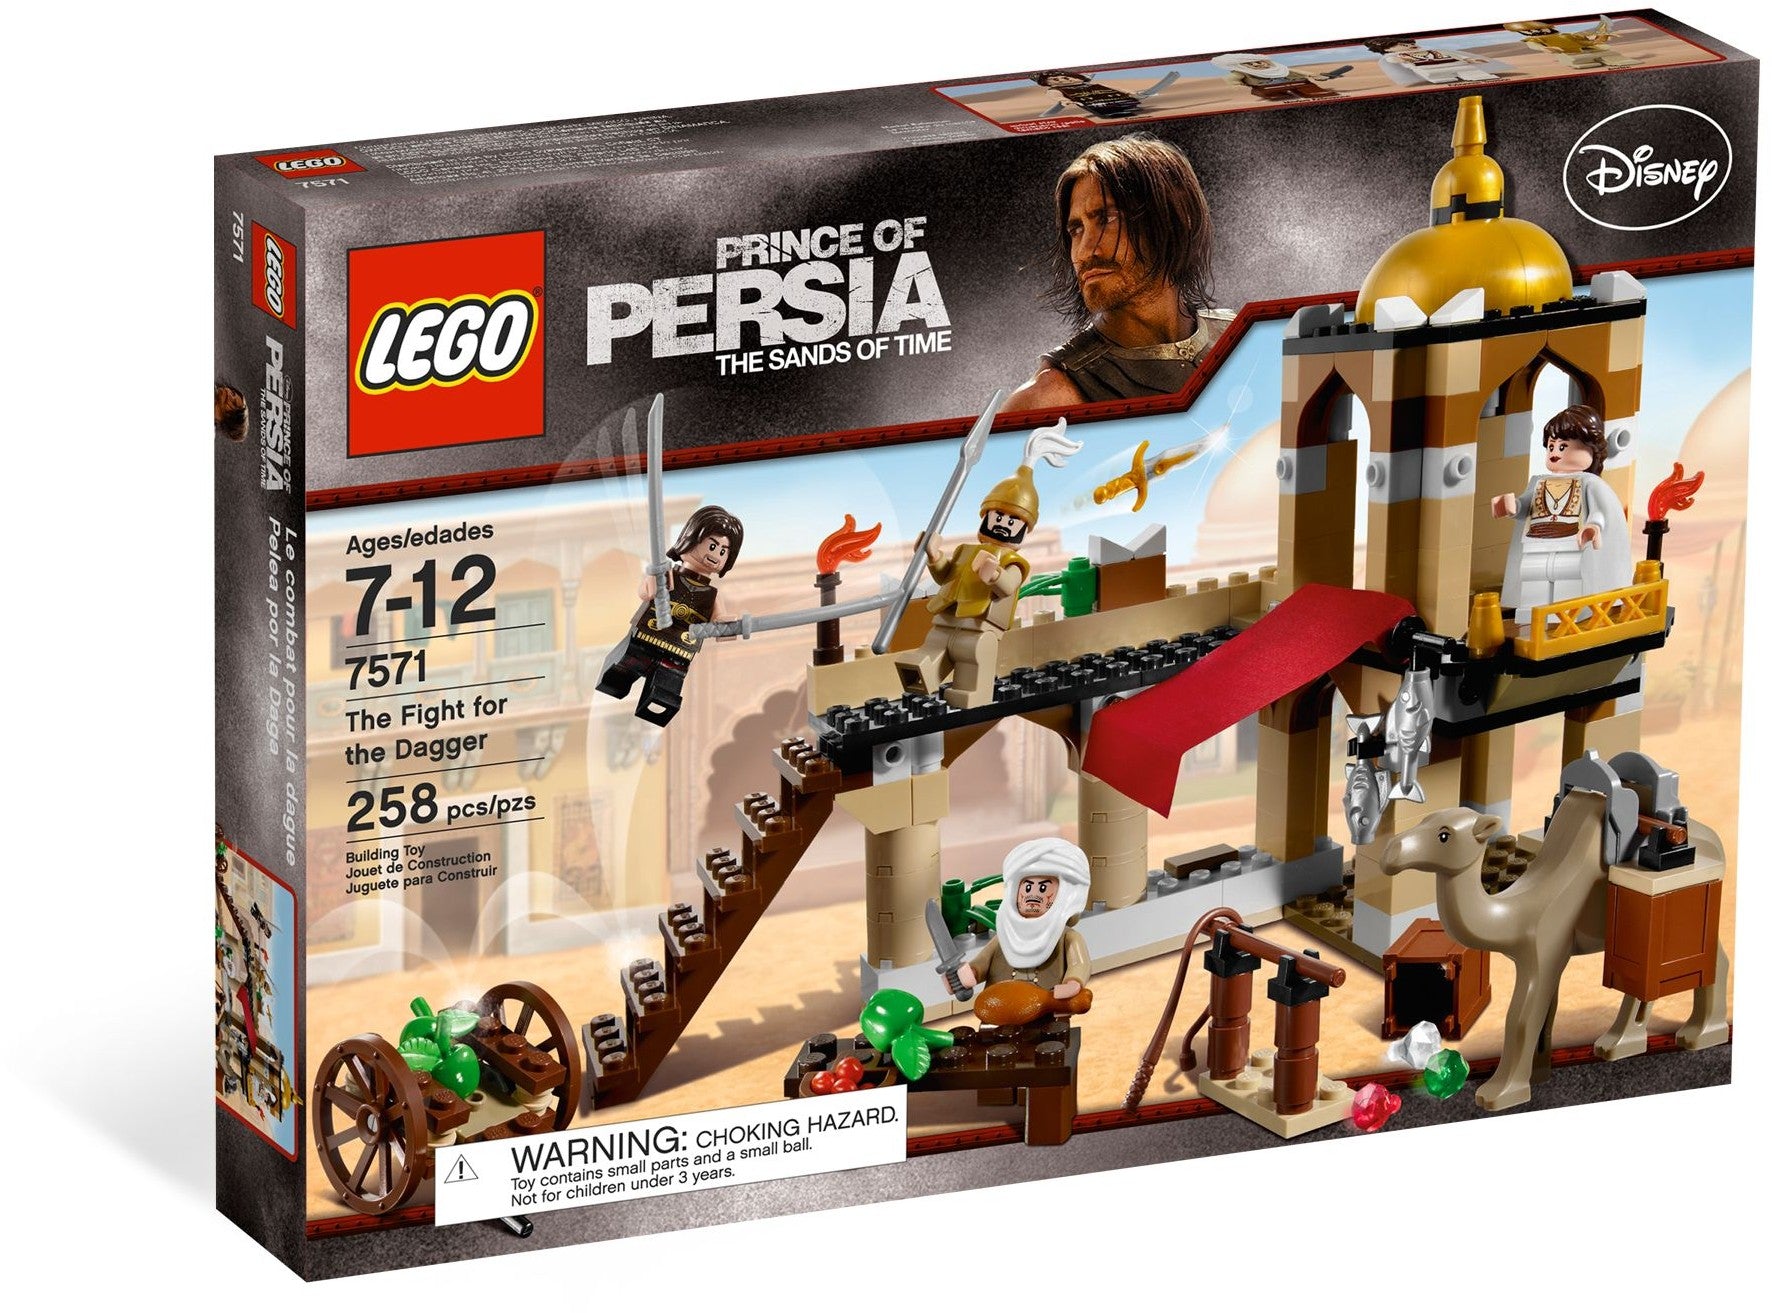 Lego Prince of Persia 7571 - The Fight for the Dagger